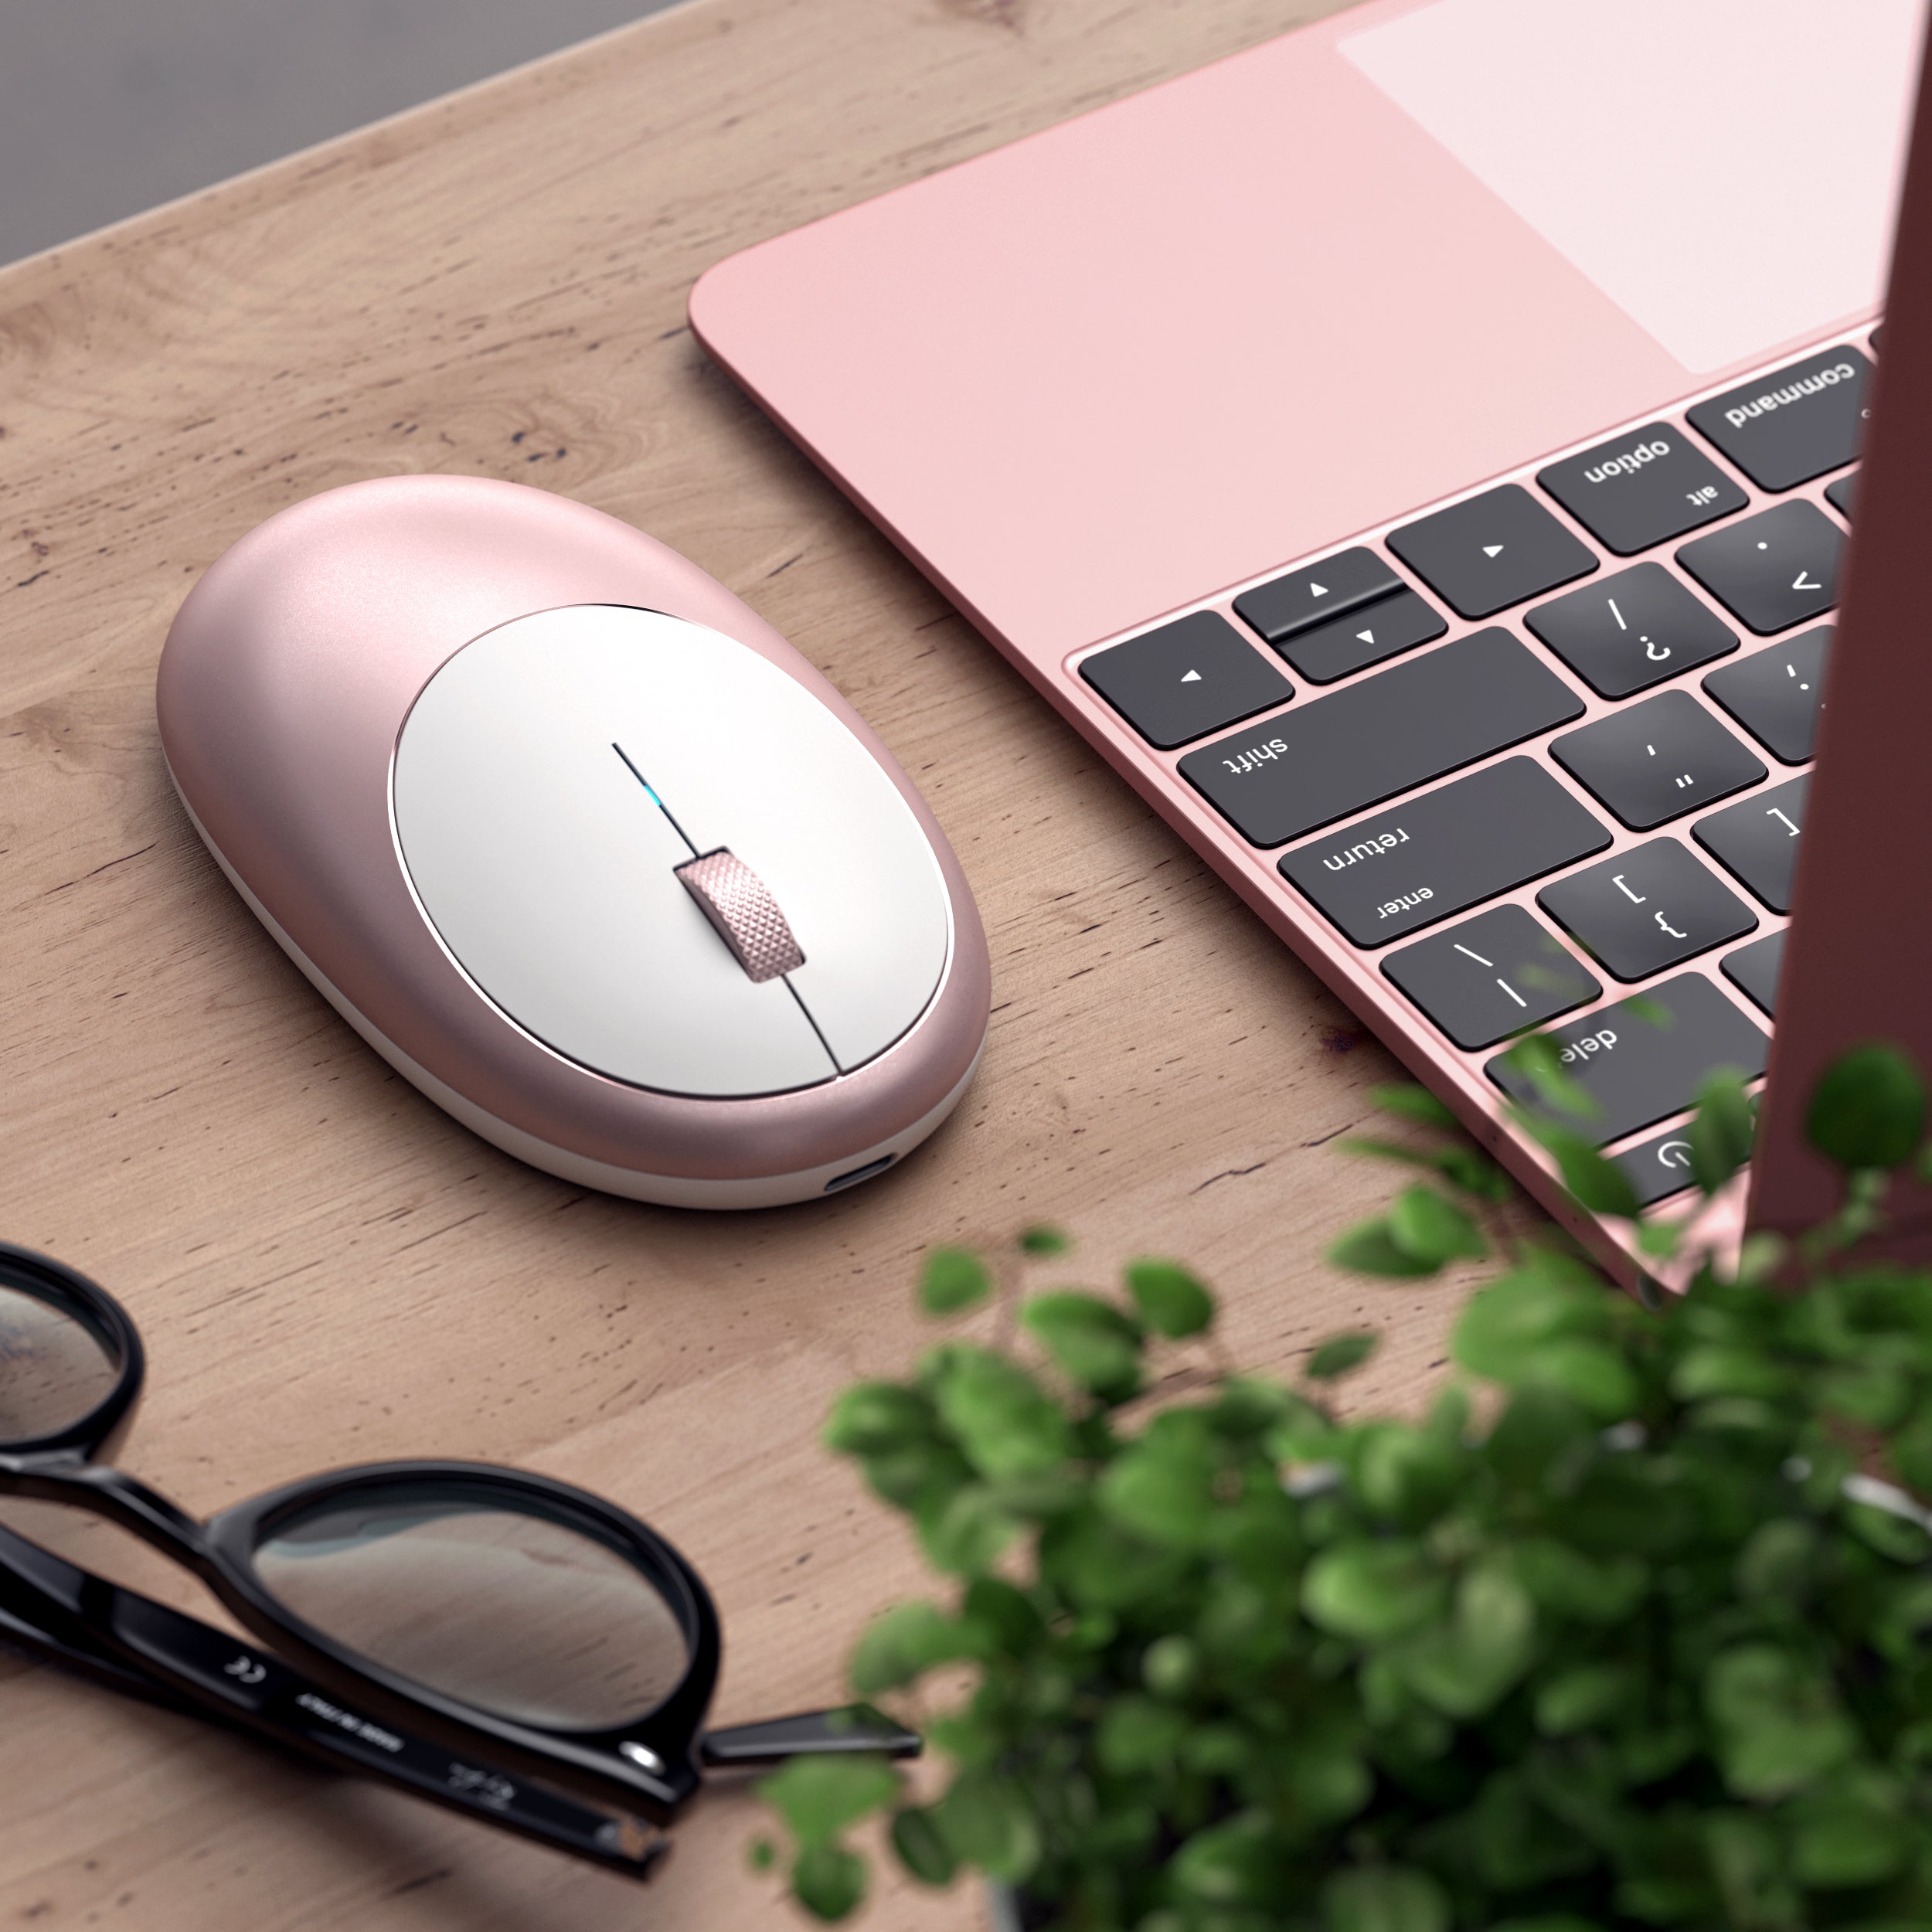 Complete your desktop with the Satechi M1 Bluetooth Mouse, featuring Bluetooth 5.0 connection, rechargeable Type-C port and modern, ergonomic design. Seamlessly connect to your favorite Bluetooth-enabled device for wireless control of your desktop or laptop, with a range of up to 32 ft. 